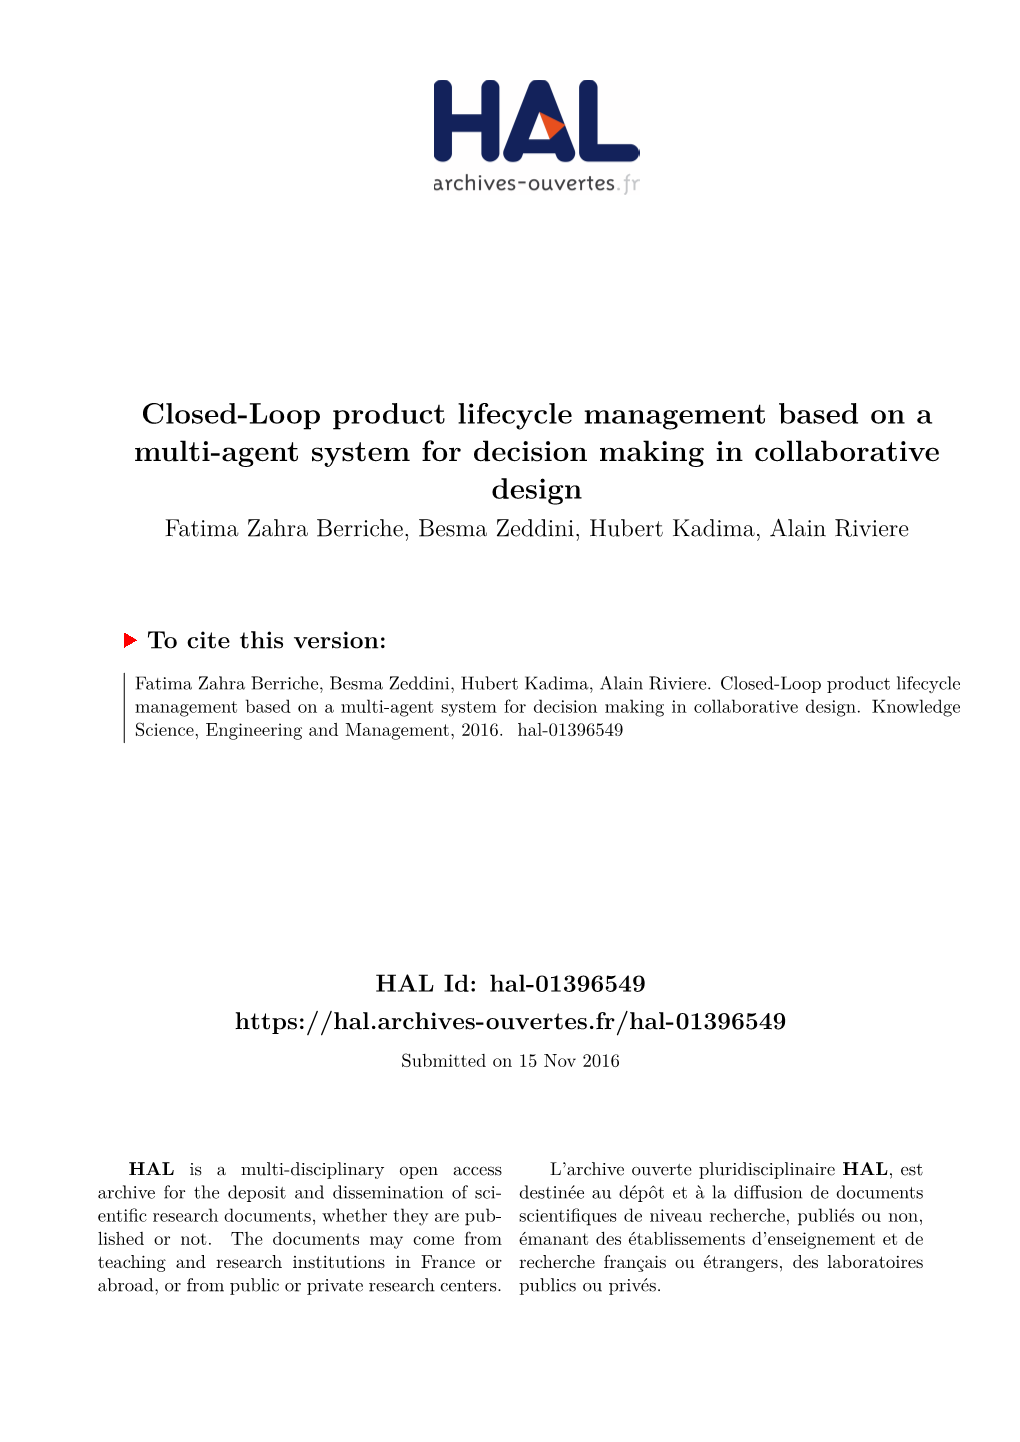 Closed-Loop Product Lifecycle Management Based on a Multi